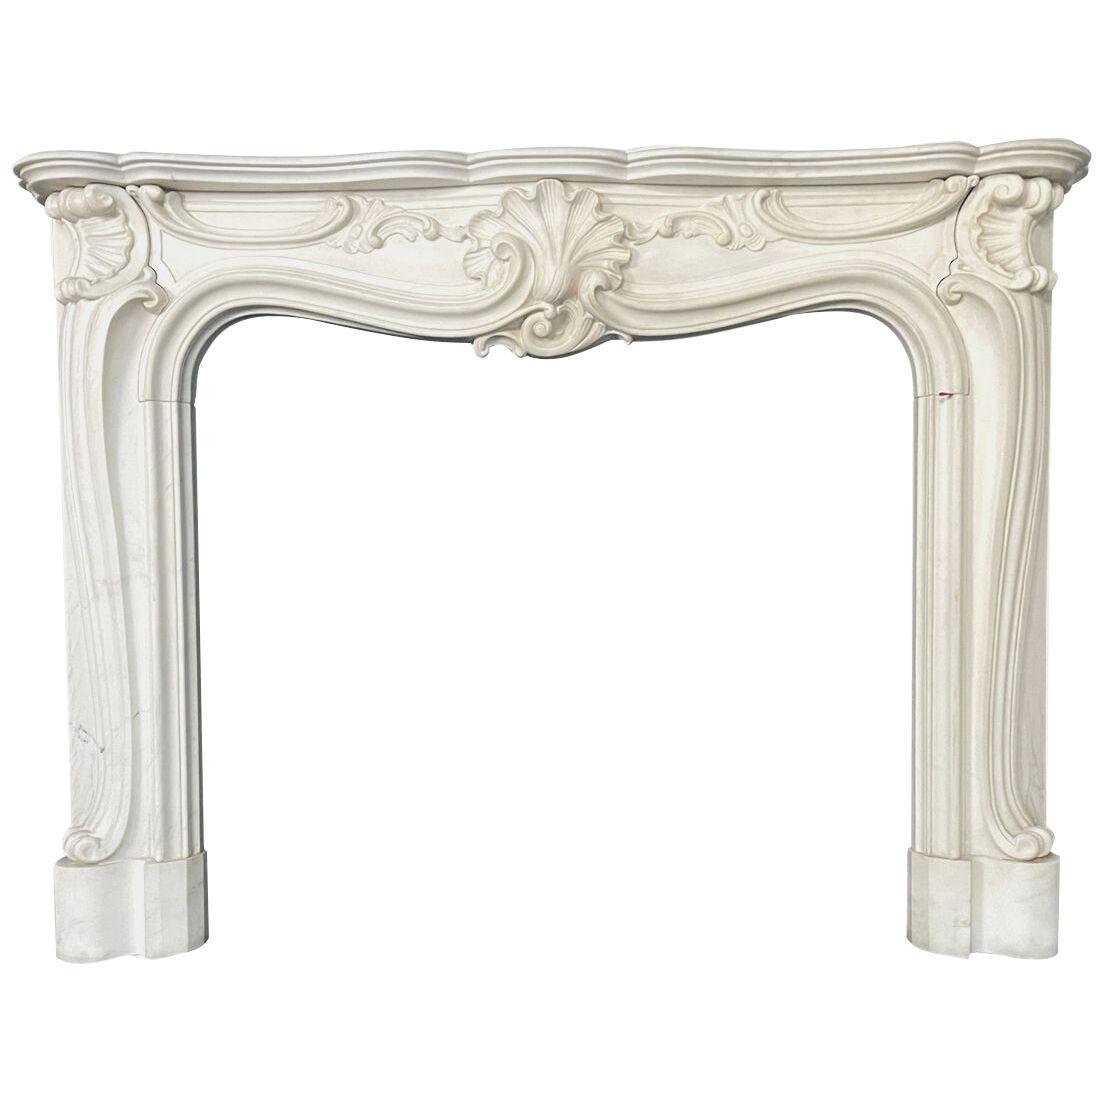 A Reclaimed Rococo French Style Marble Fireplace Mantel 